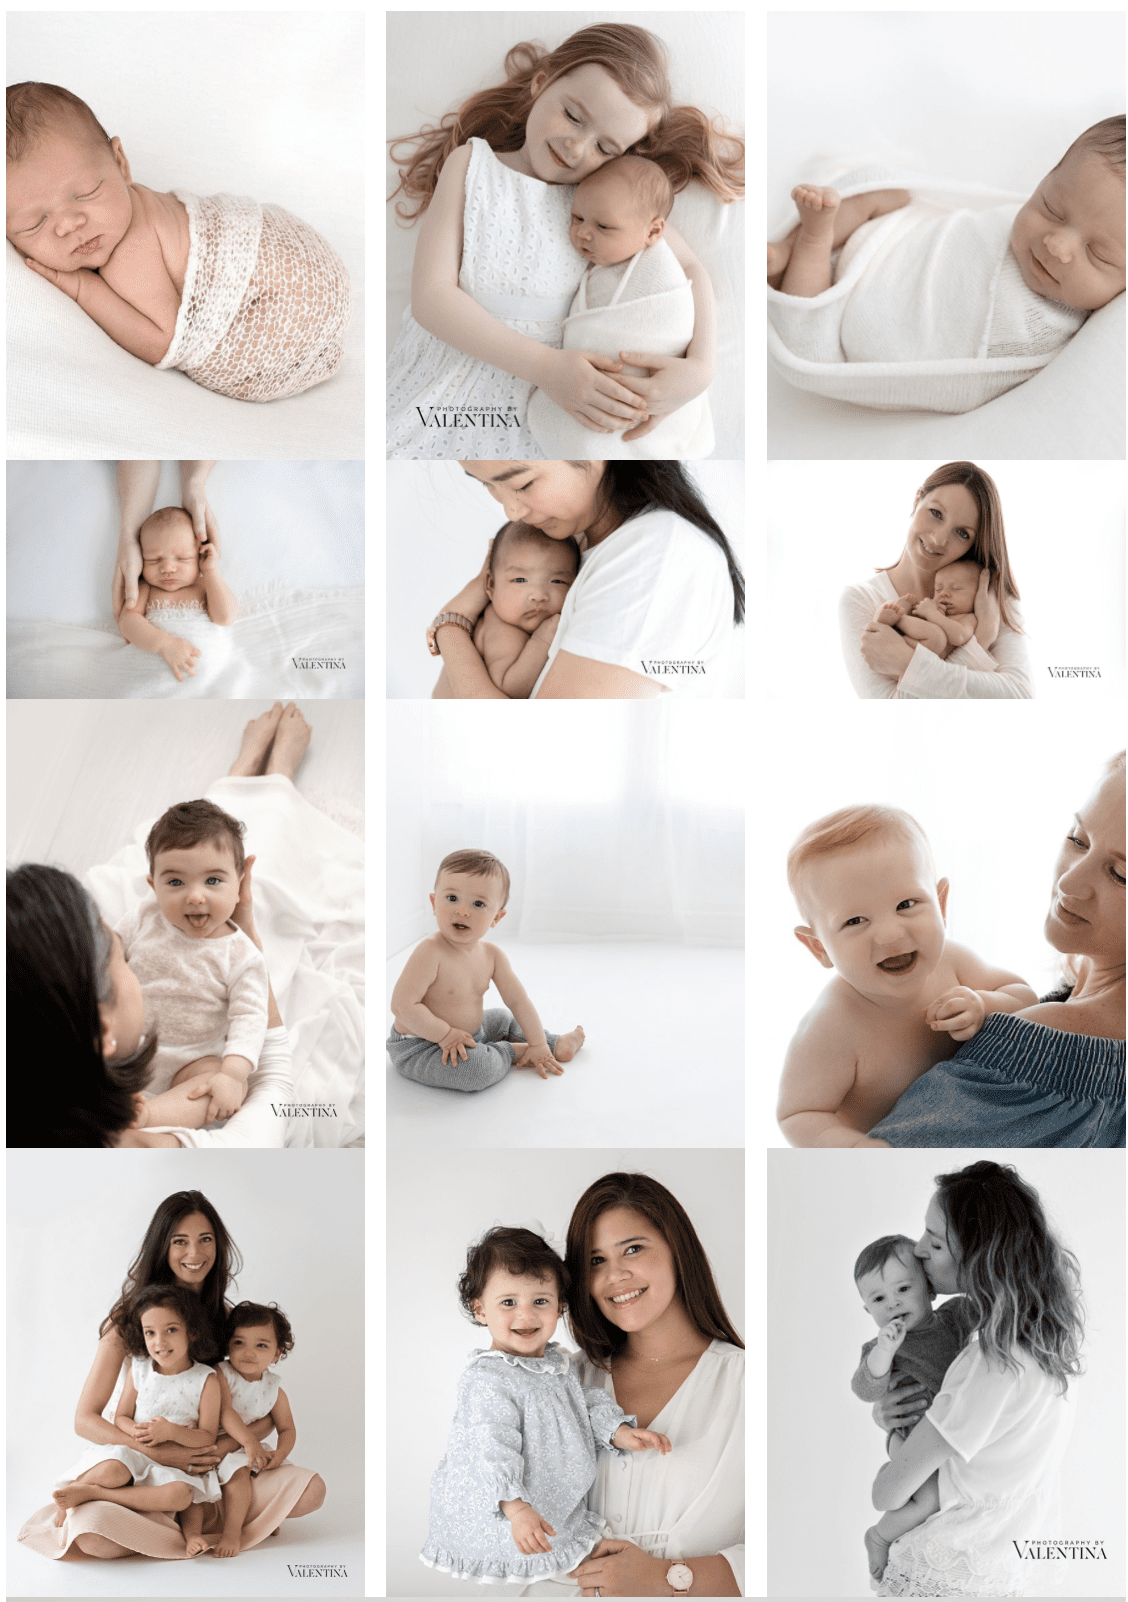 collection of baby images in the first year: from newborn to first birthday